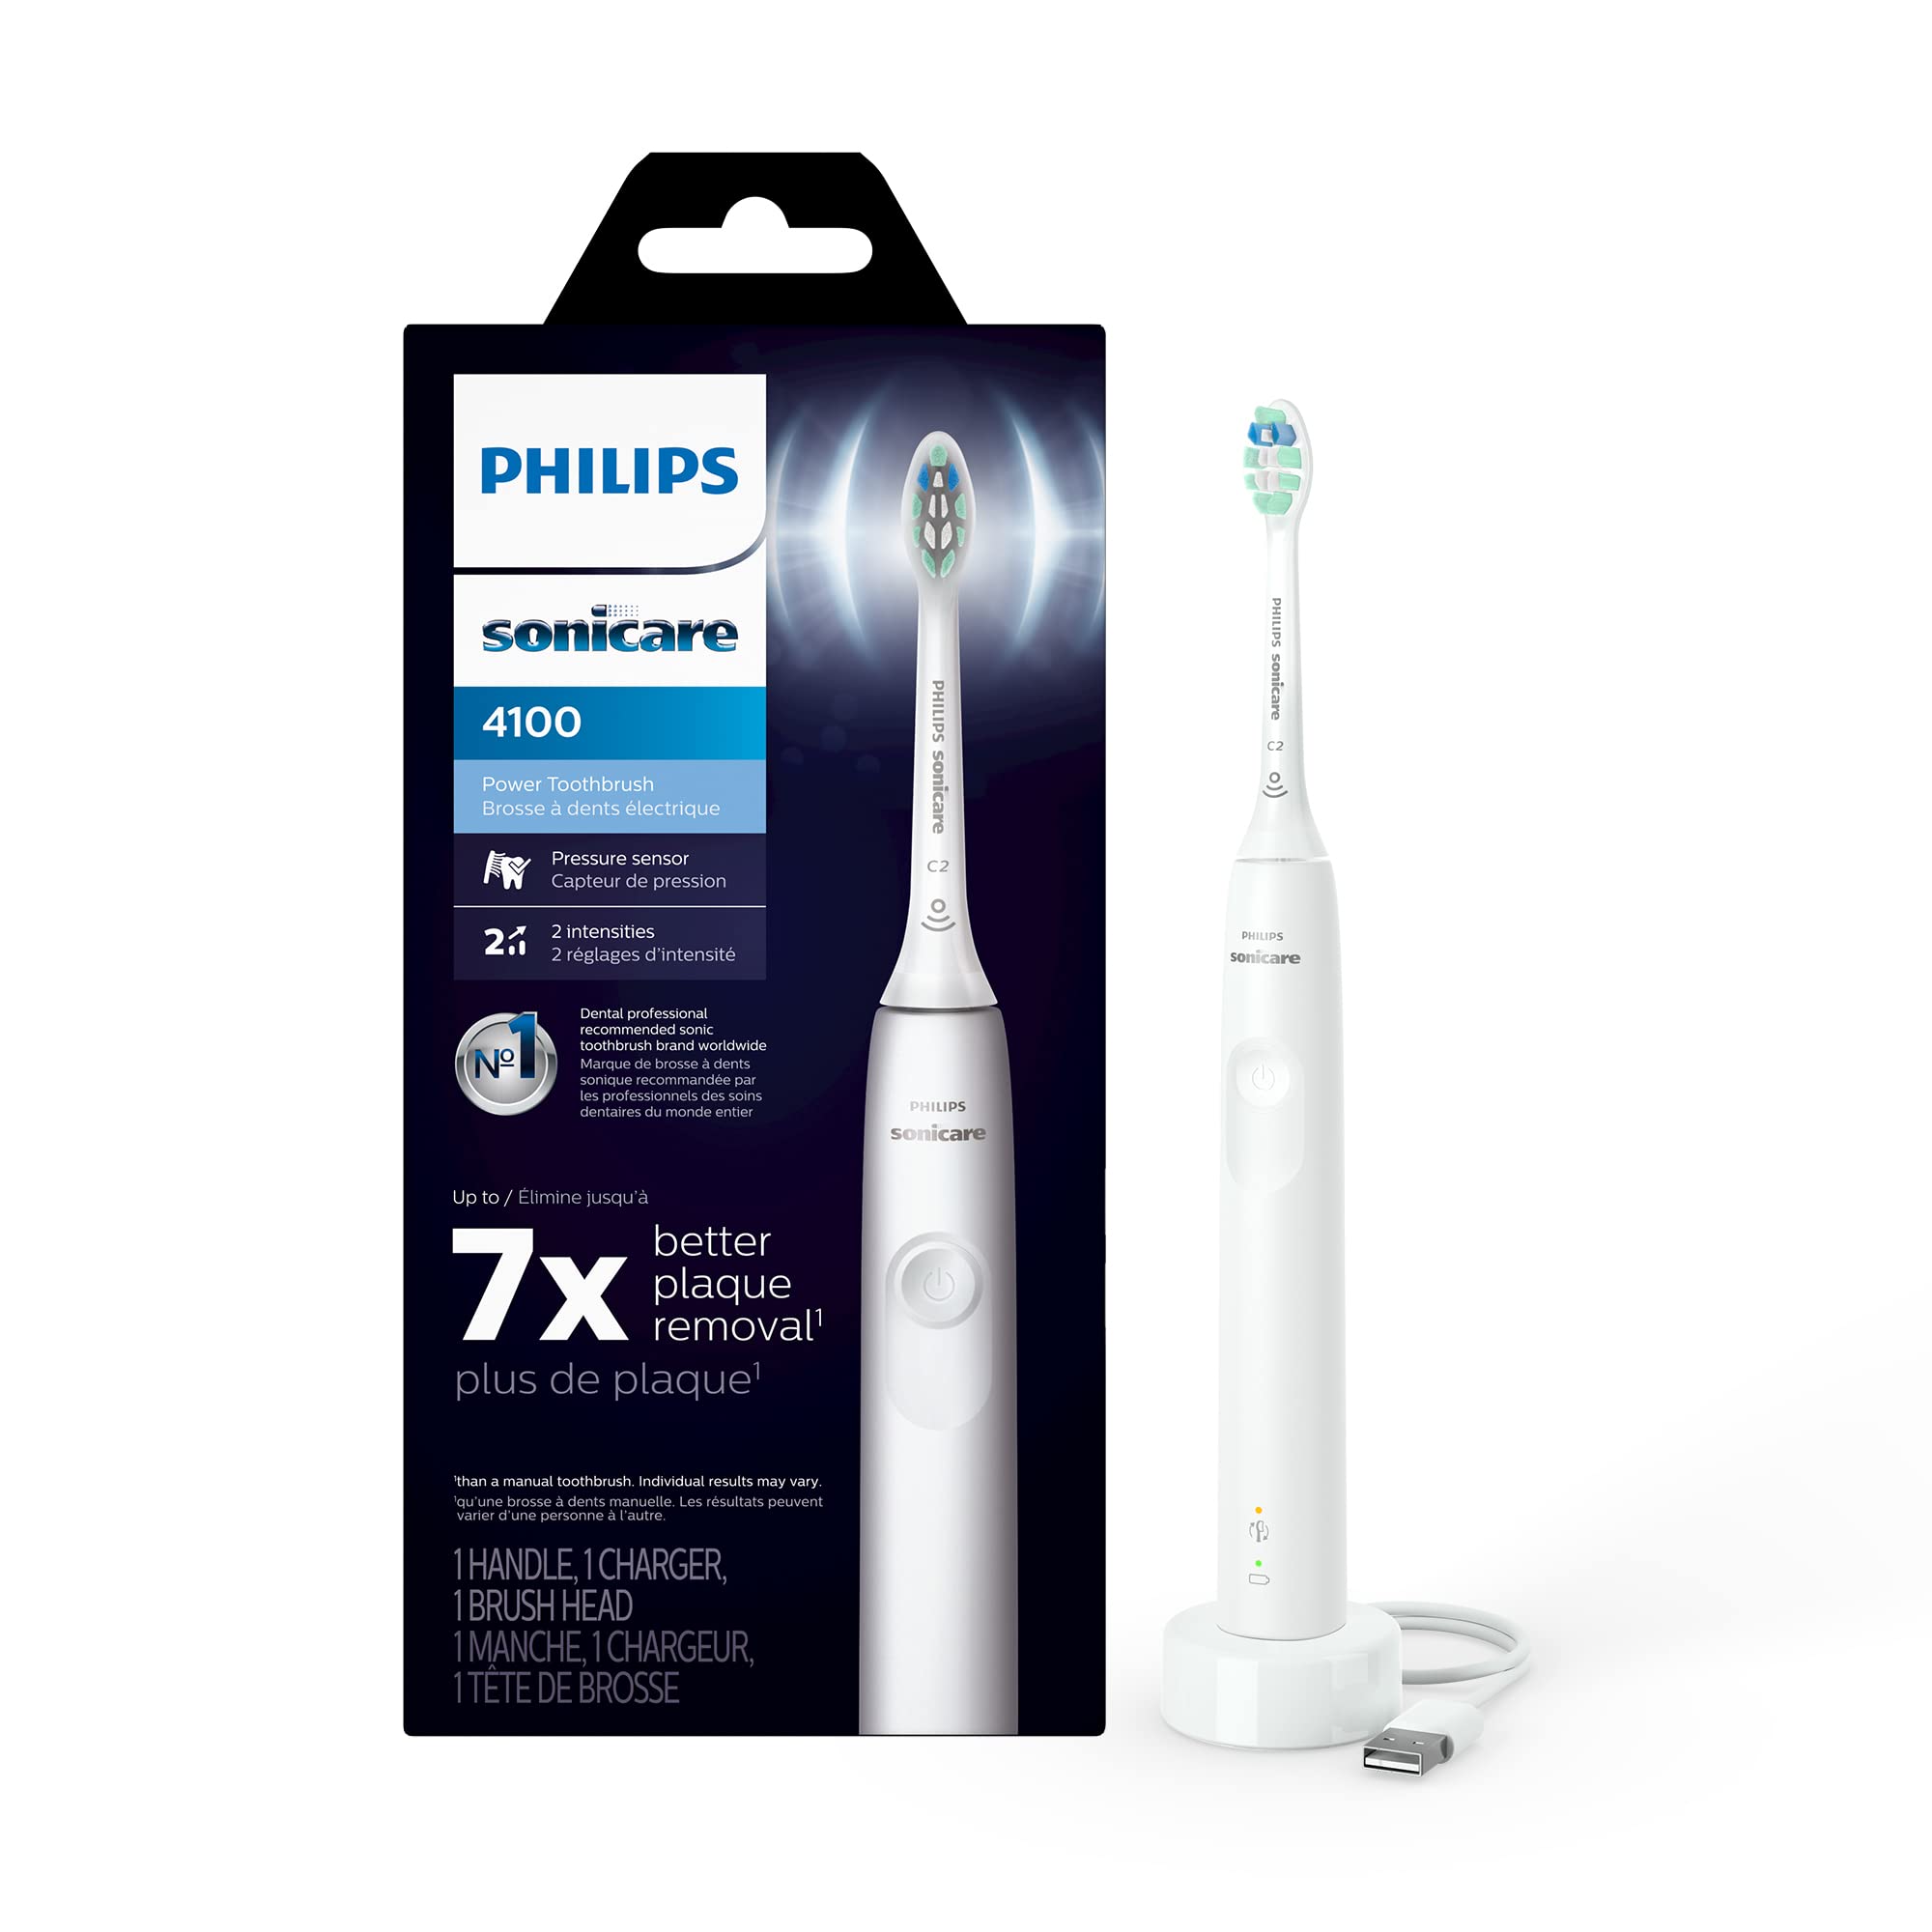 Philips Sonicare 4100 Power Toothbrush, Rechargeable Electric Toothbrush with Pressure Sensor, White HX3681/23 $33.95